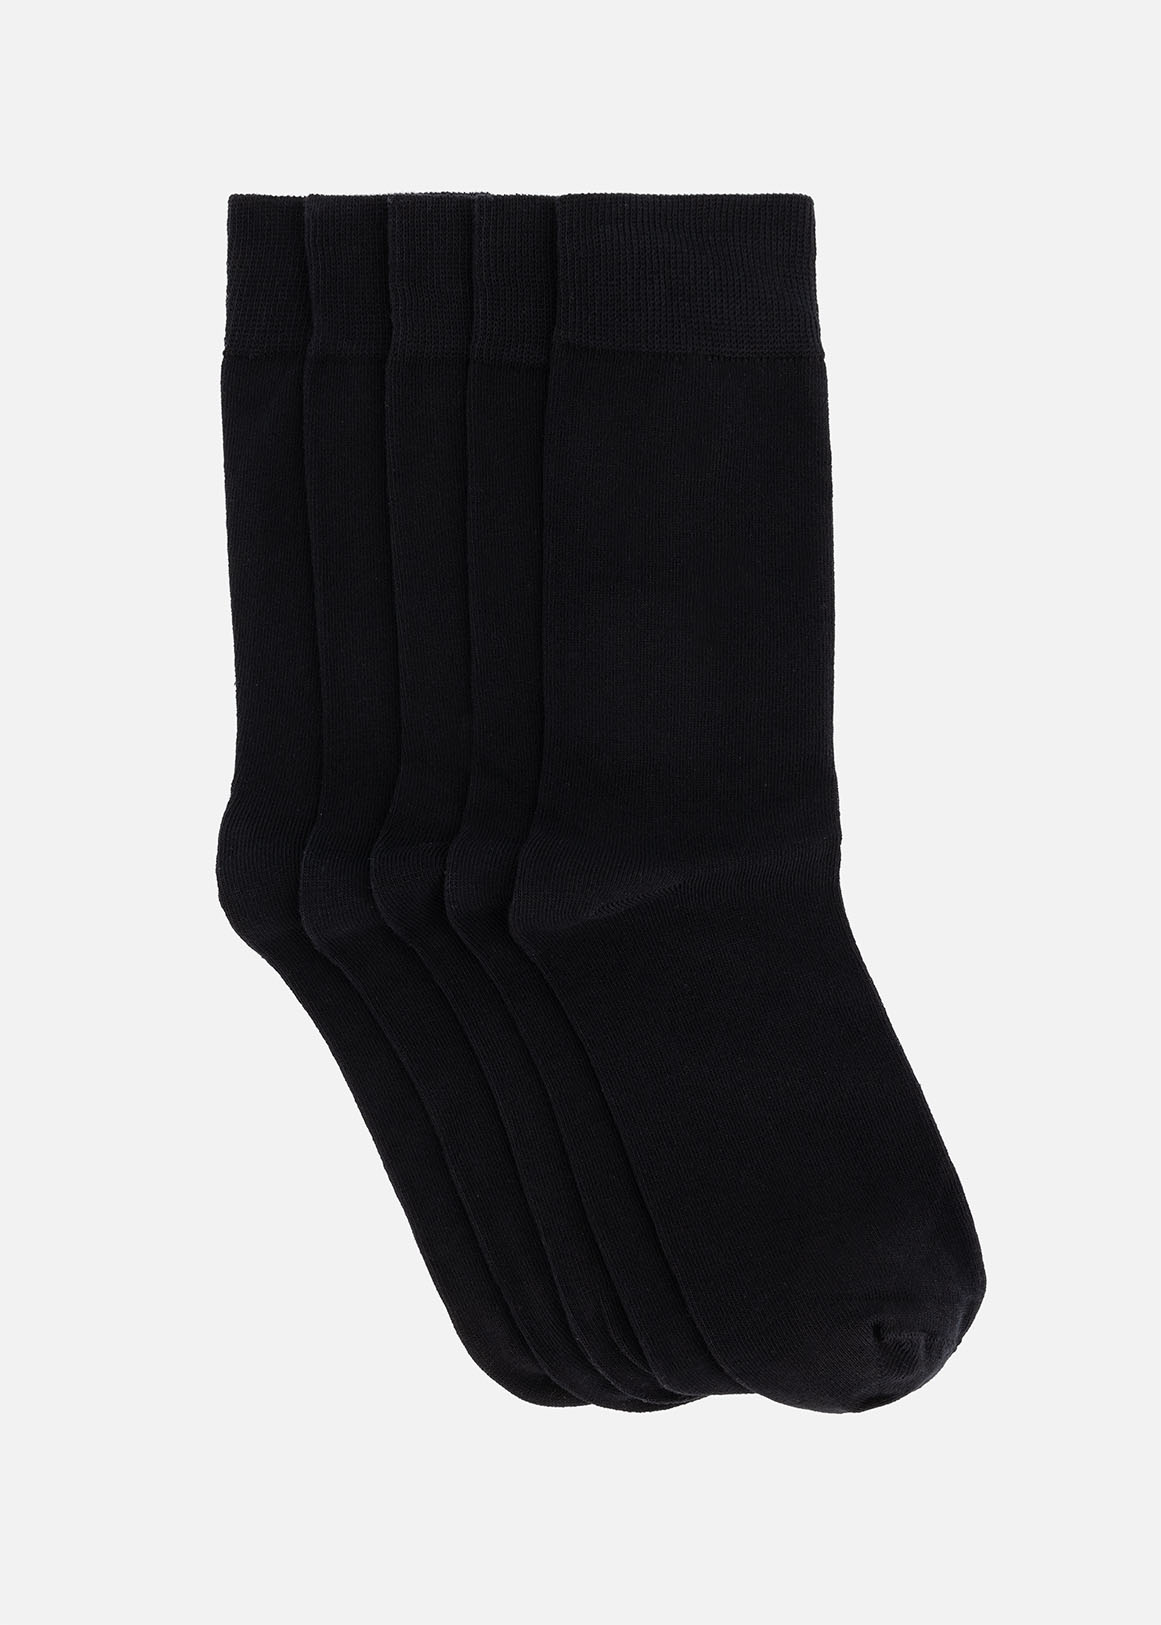 Black Cotton Rich Socks 5 Pack | Woolworths.co.za